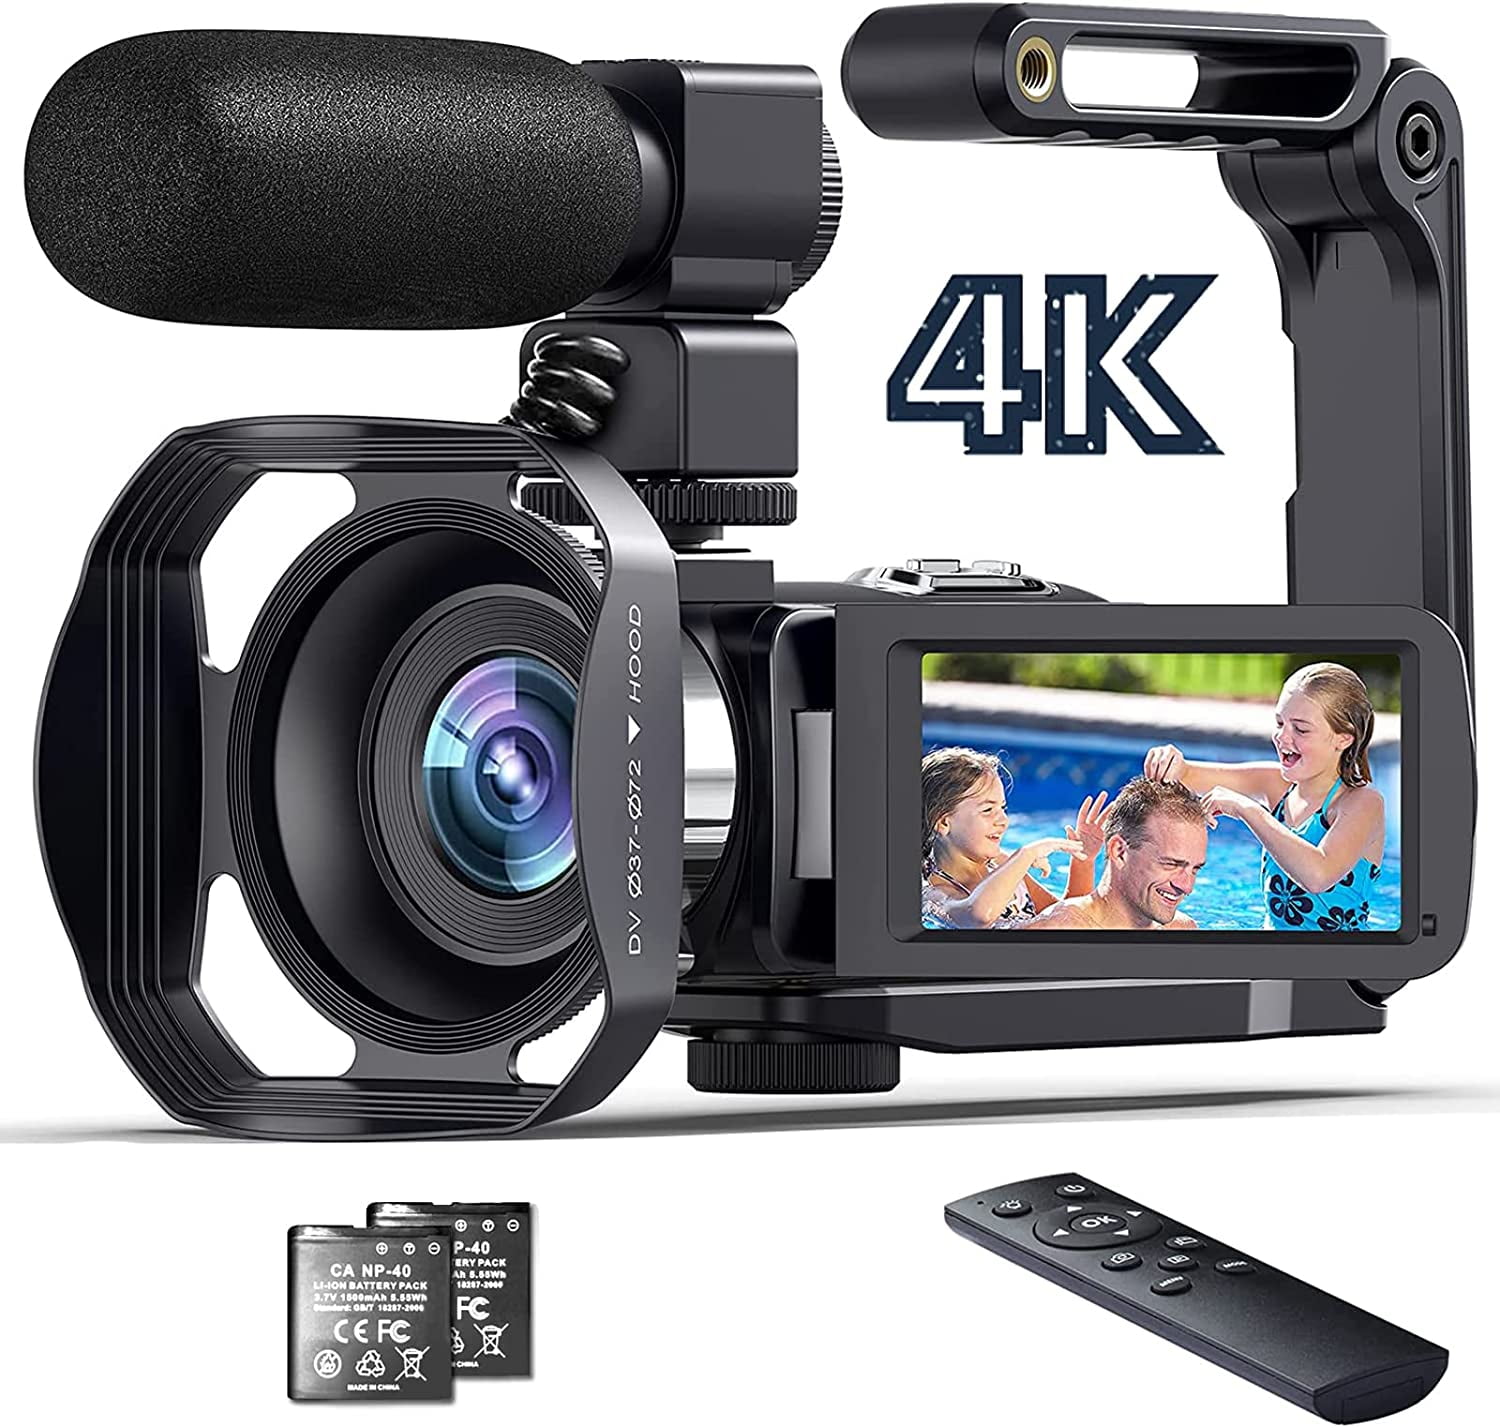 Video Camera 4K Camcorder Vlogging Camera for YouTube IR Night Vision 48MP 30FPS 3.0 Touch Screen 30X Digital Zoom Camera Recorder with Microphone Handhold Stabilizer 2.4G Remote Control 